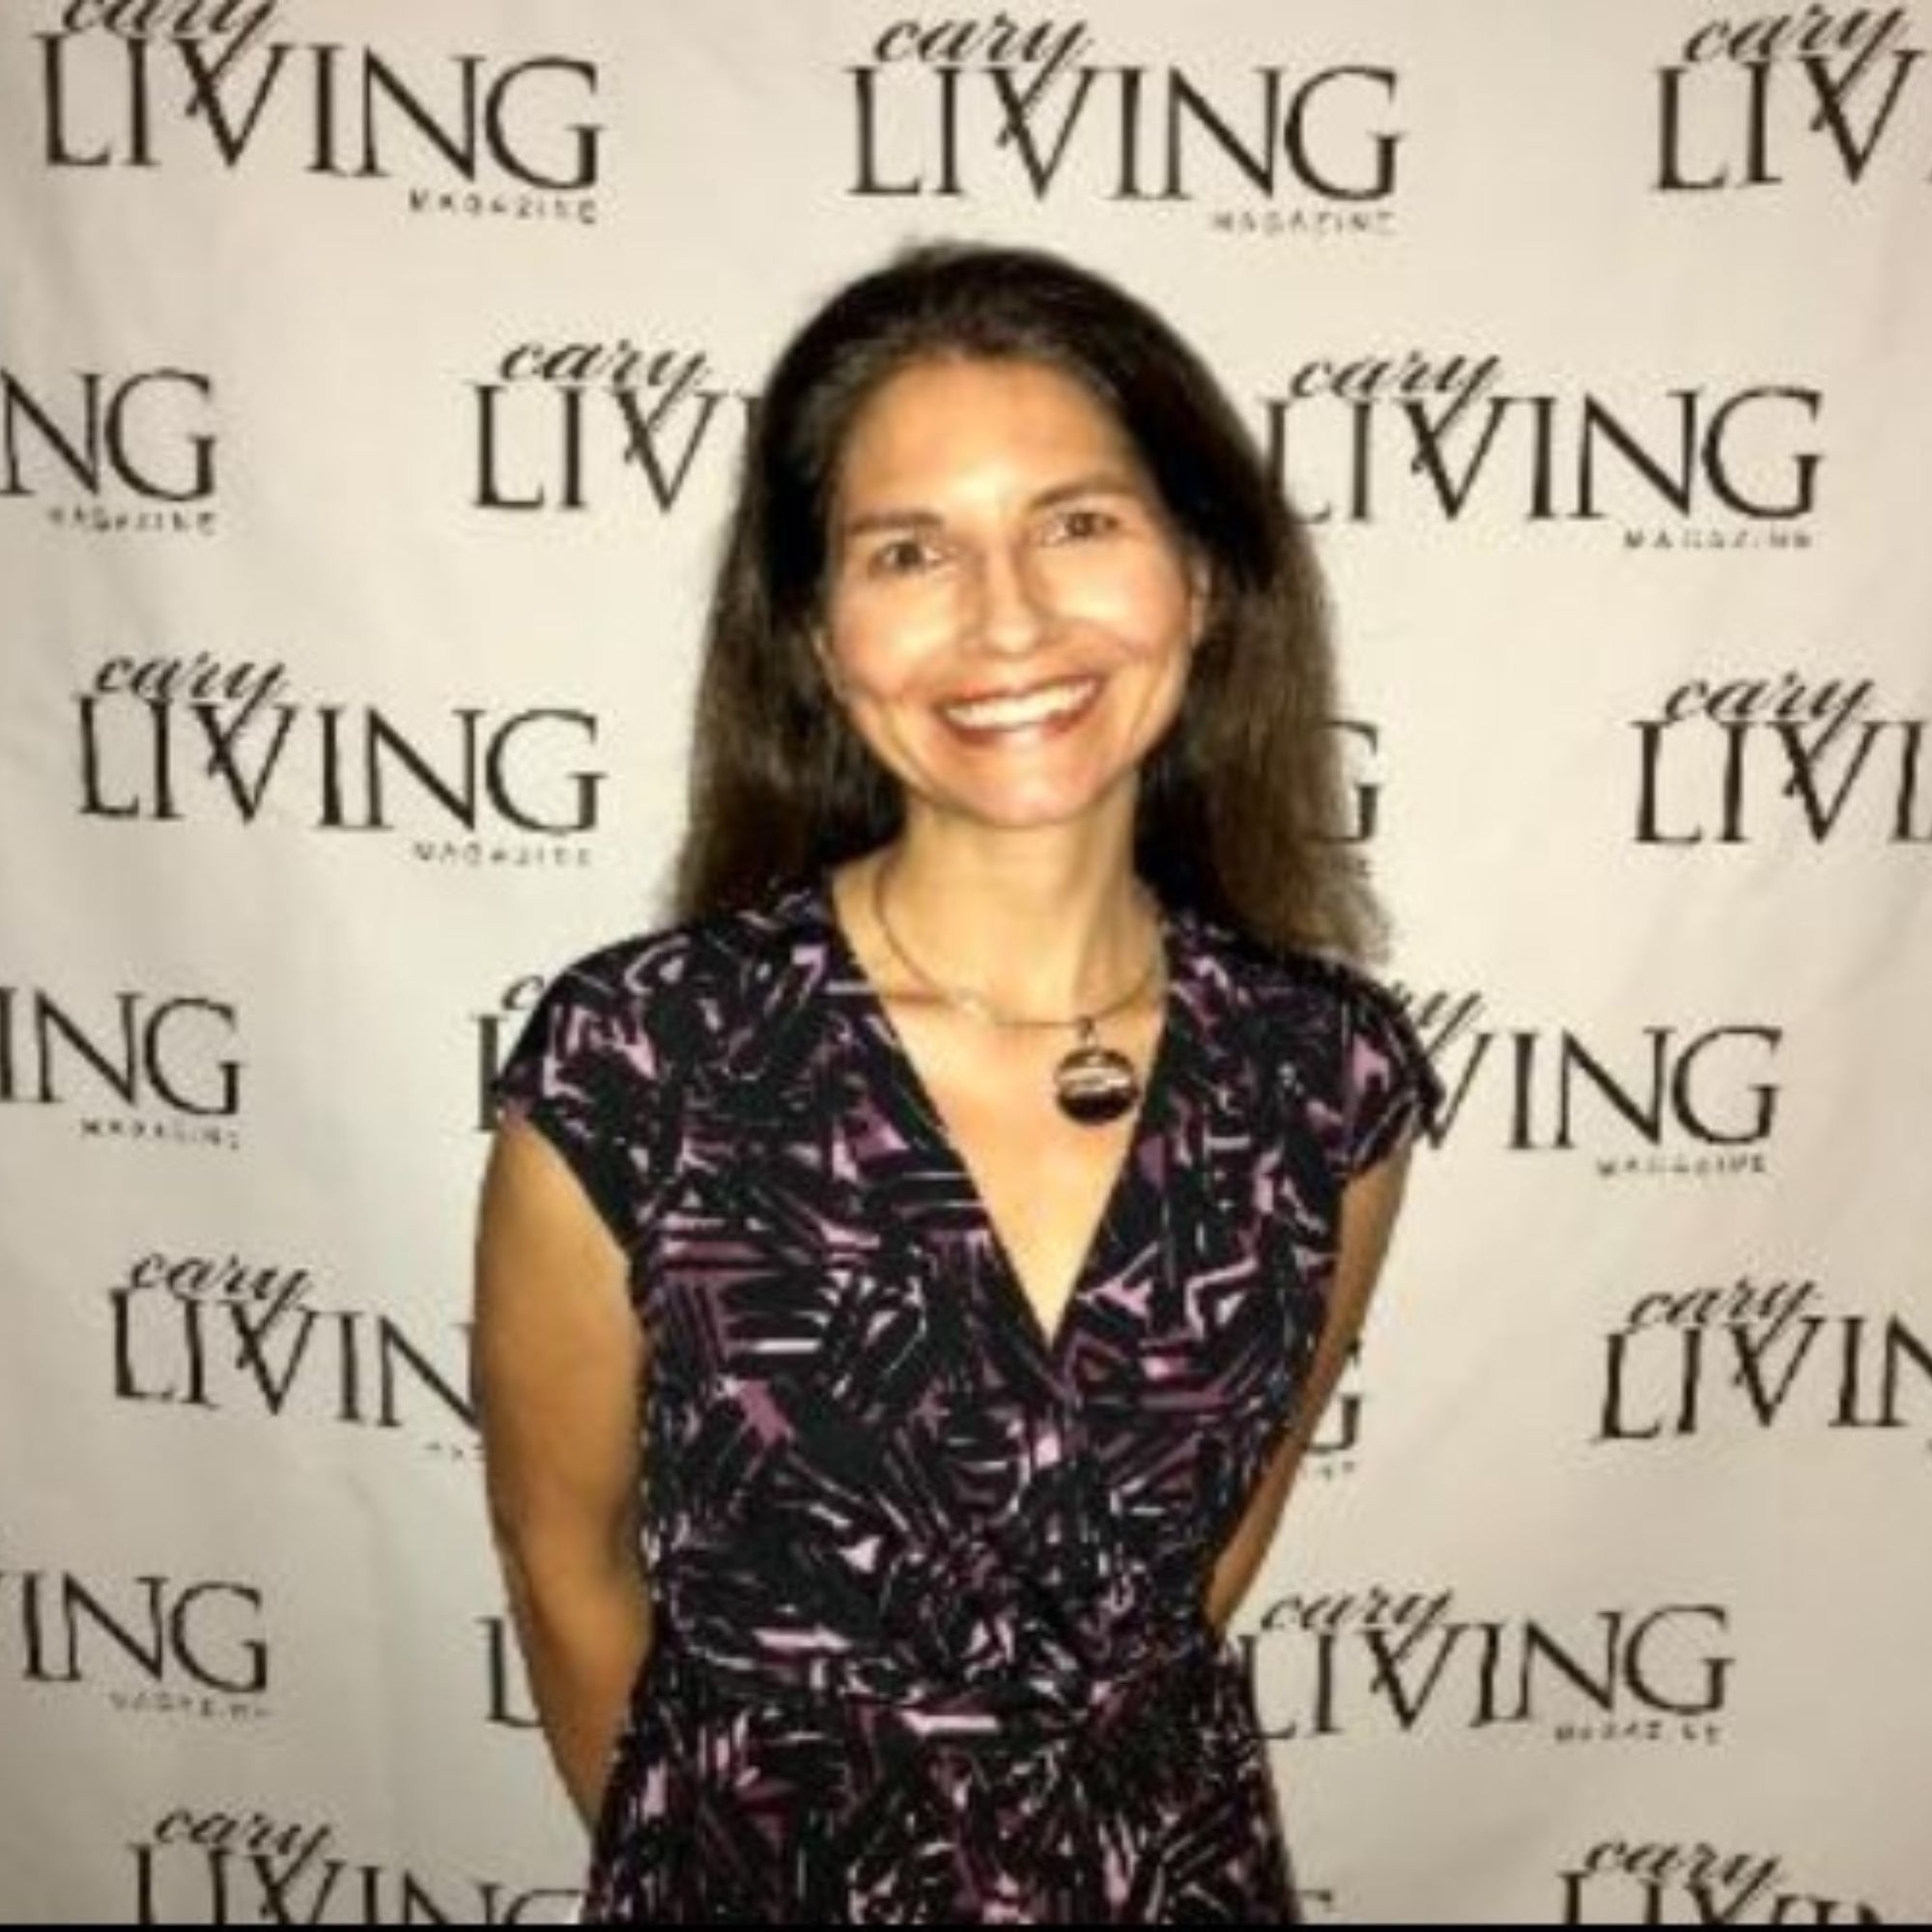 A picture of Amy Bell, a woman with brown hair wearing v-neck navy blue dress standing in front of a white background with black logos saying 'Cary Living' on them